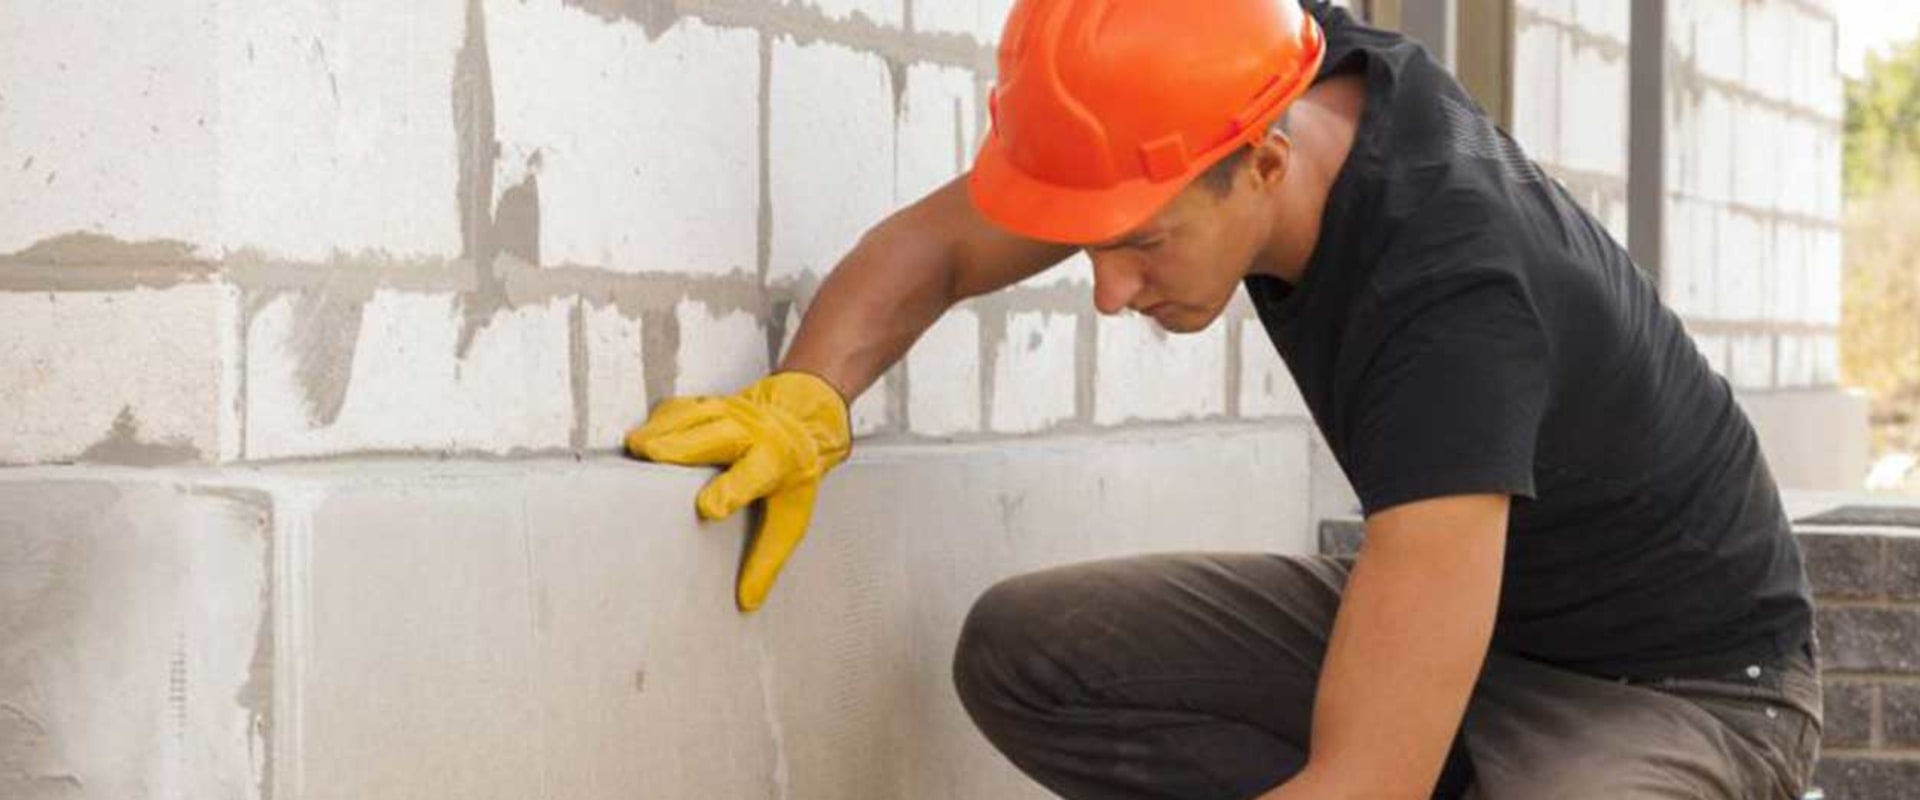 Basement Foundation Repair Services in Toronto